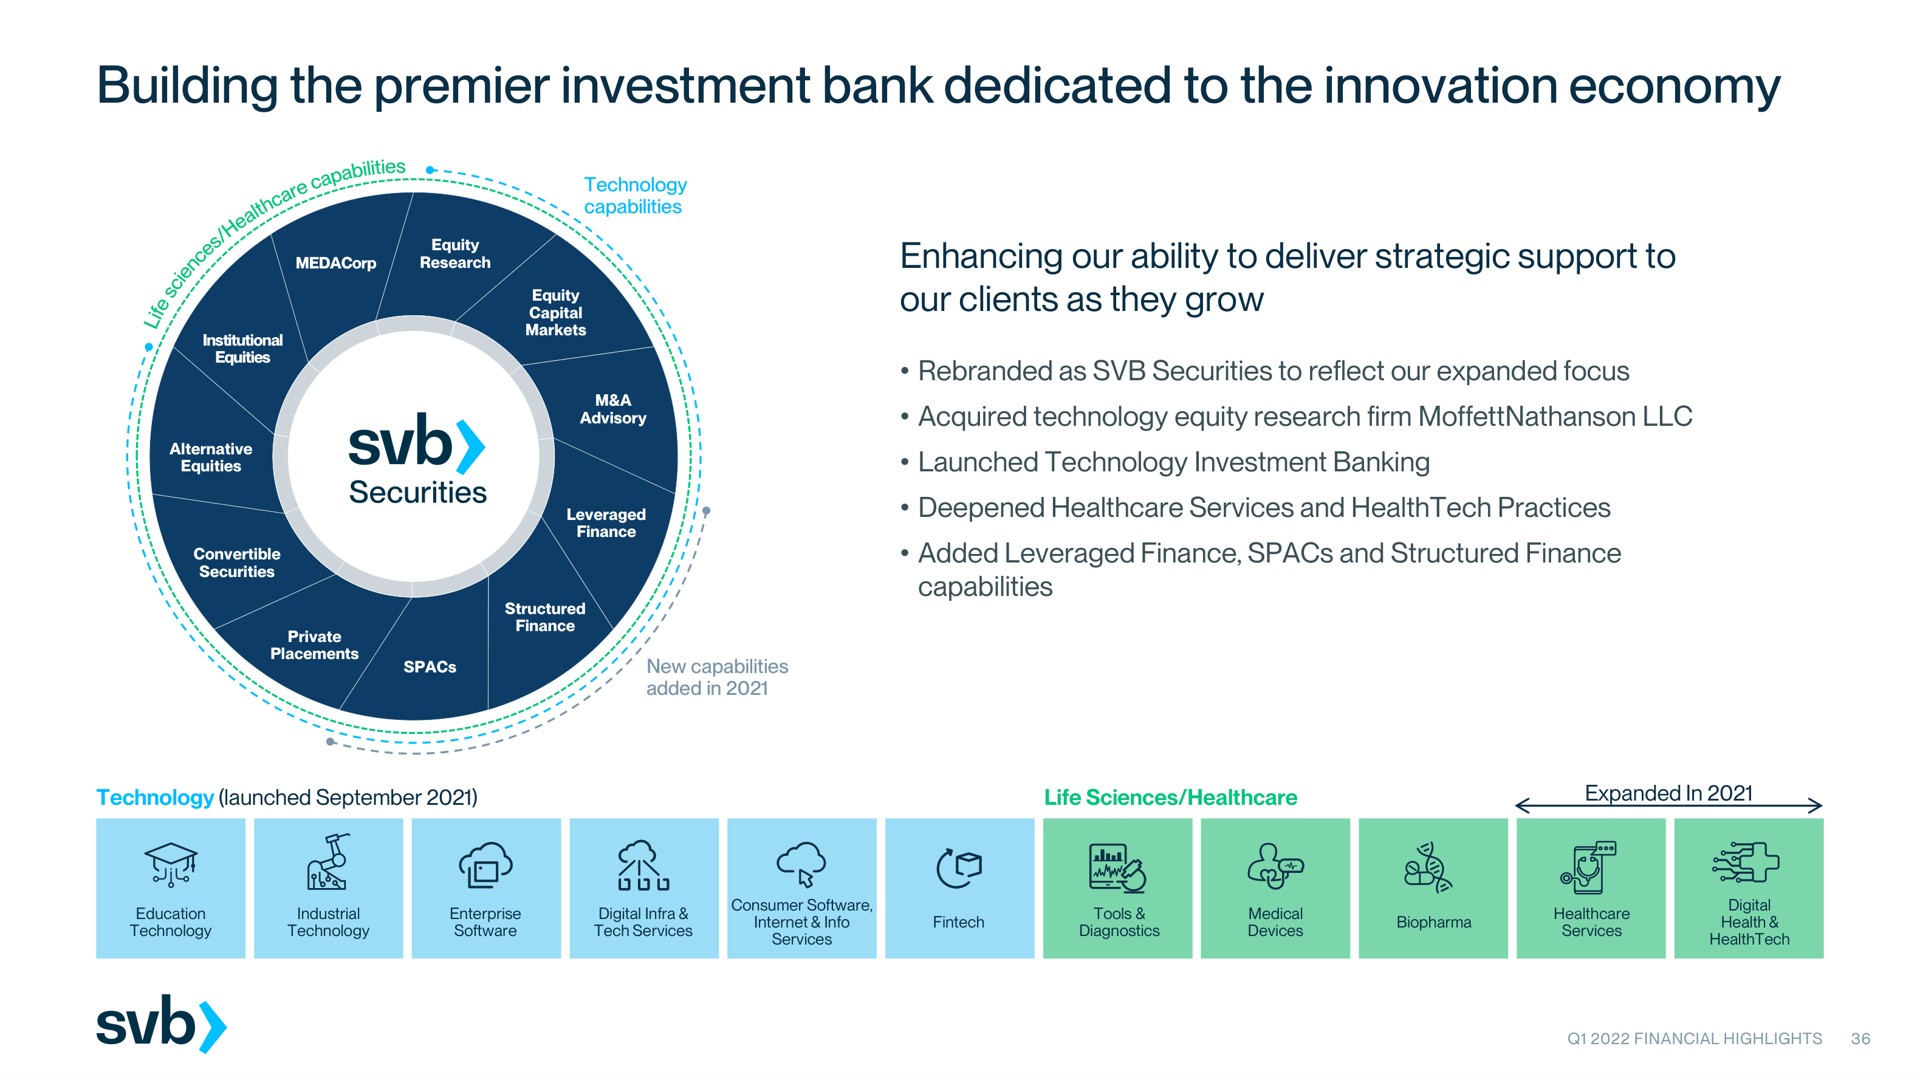 building the premier investment bank dedicated to the innovation economy by i | Silicon Valley Bank